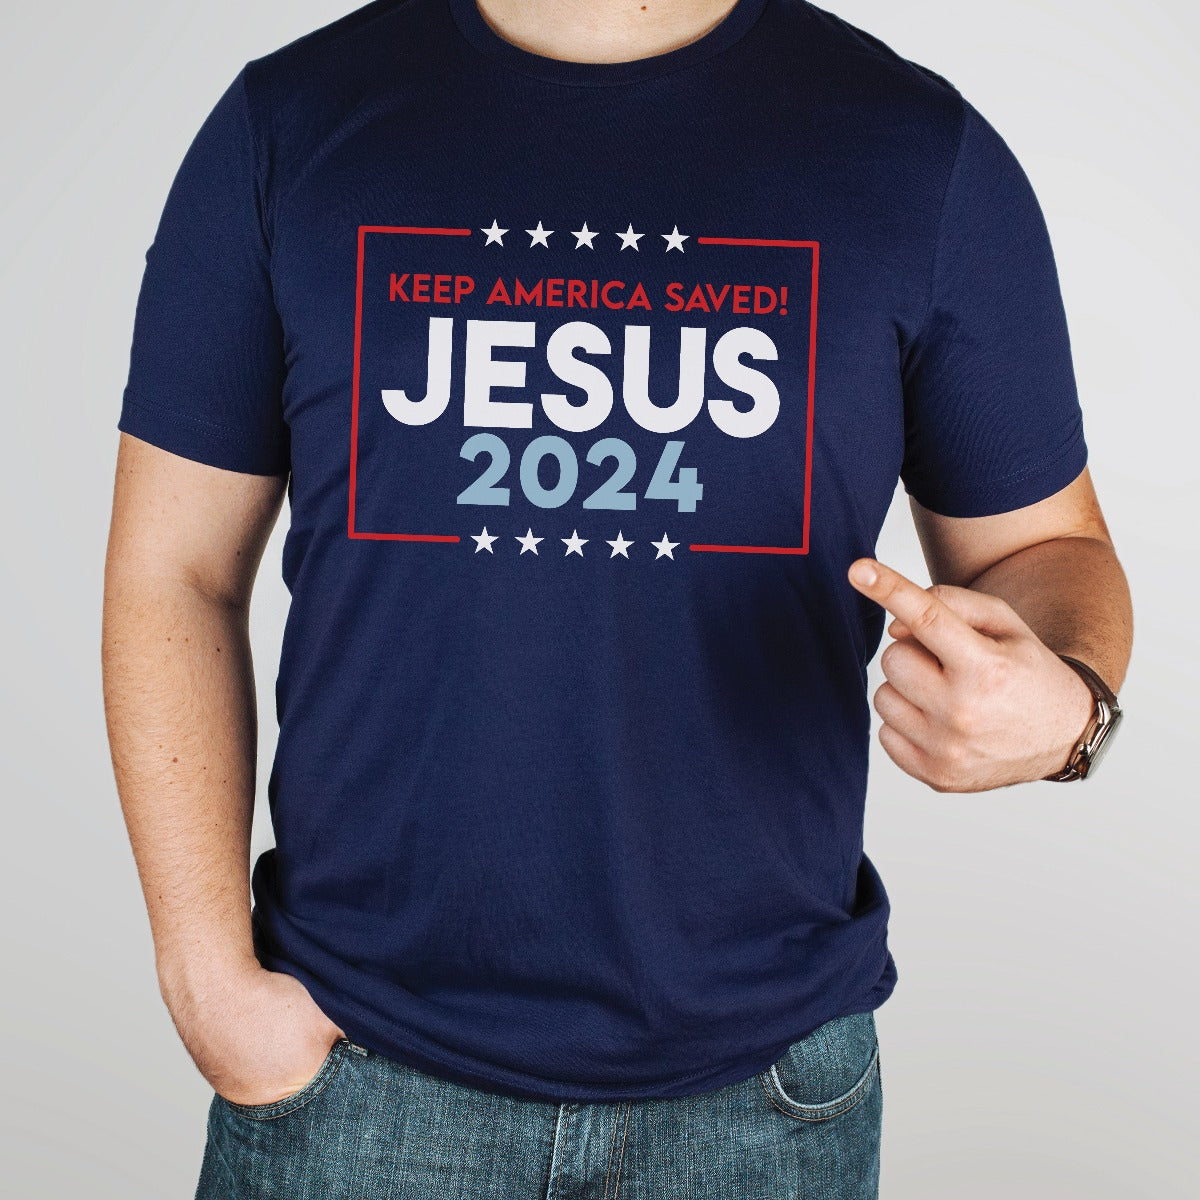 Patriotic man wearing a navy blue stars and stripes Presidential election vote unisex Christian t-shirt, Jesus 2024 Keep America Saved" in bold red, white, and blue fonts, made in the USA, made for men and women God & Country Patriots